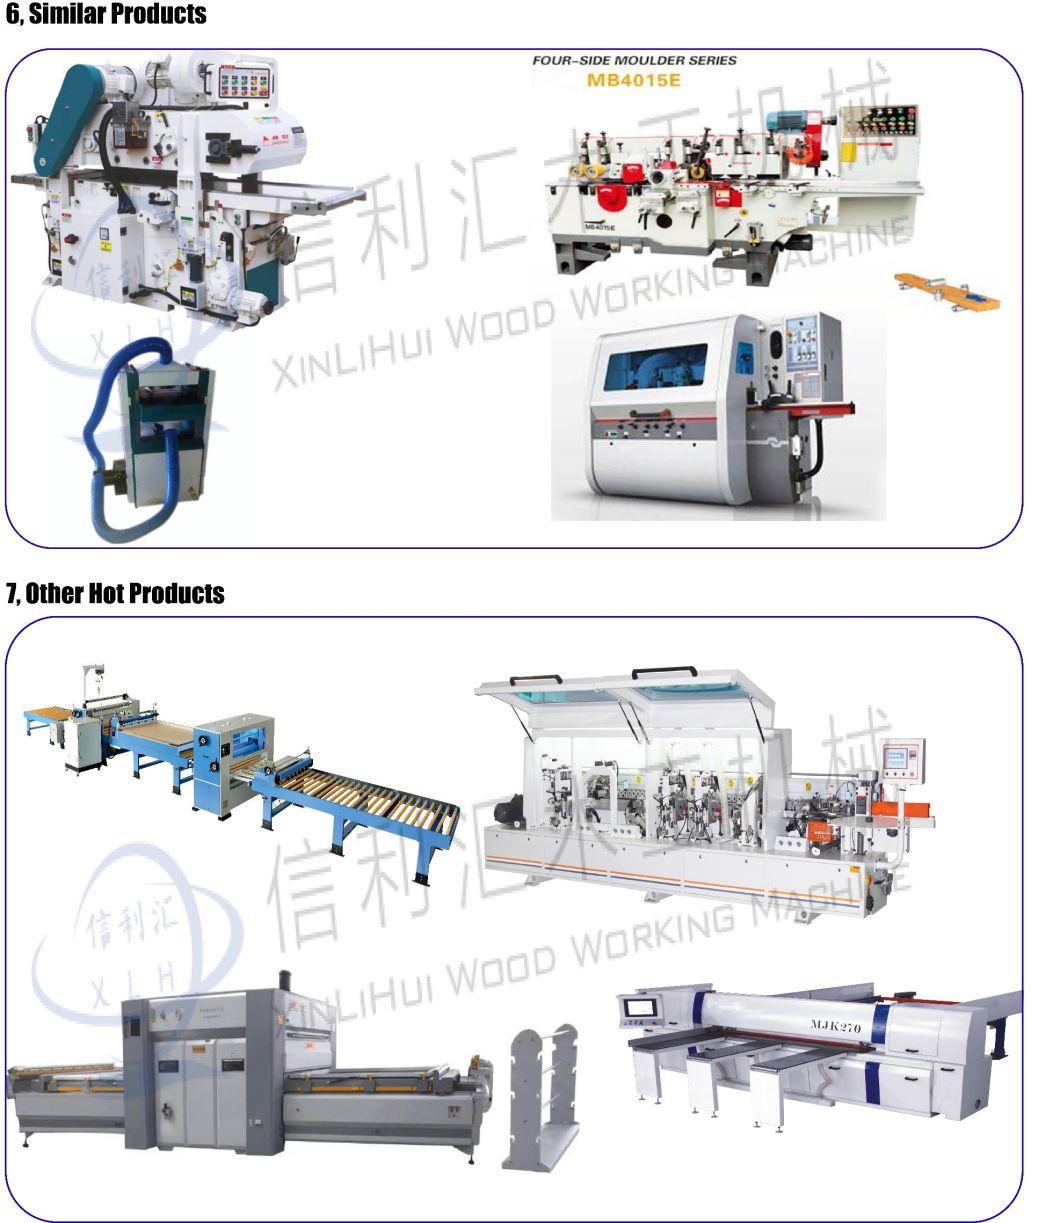 Qingdao Wood Moulding Machine / Planing Machine Four Side Moulder /Planer Machine Within 130mm-230mm Solid Wood Parquet From Beech and Oak Wood